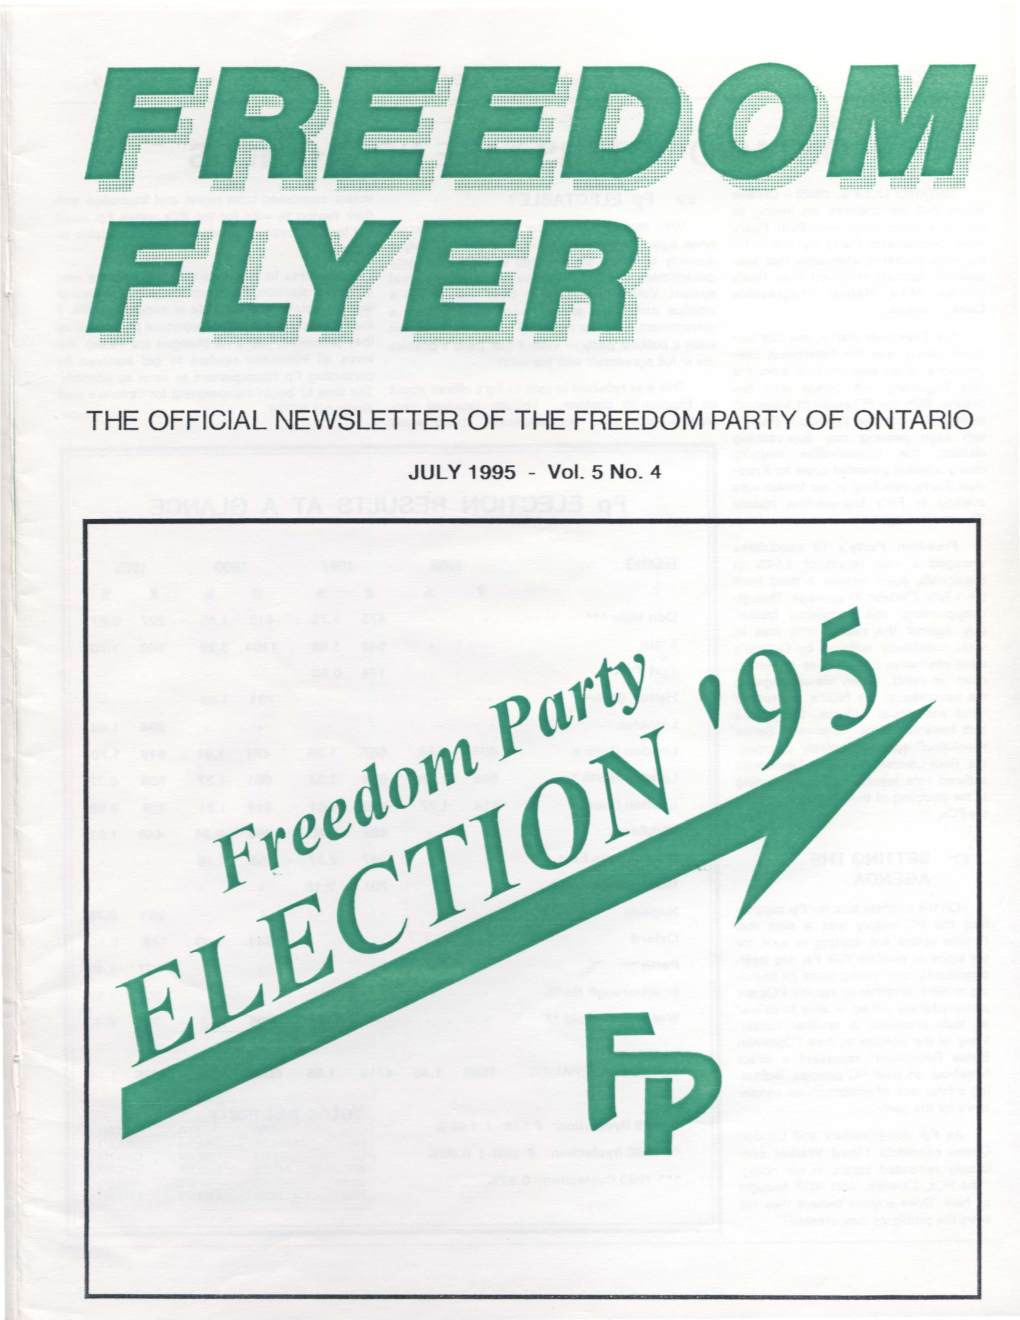 The Official Newsletter of the Freedom Party of Ontario